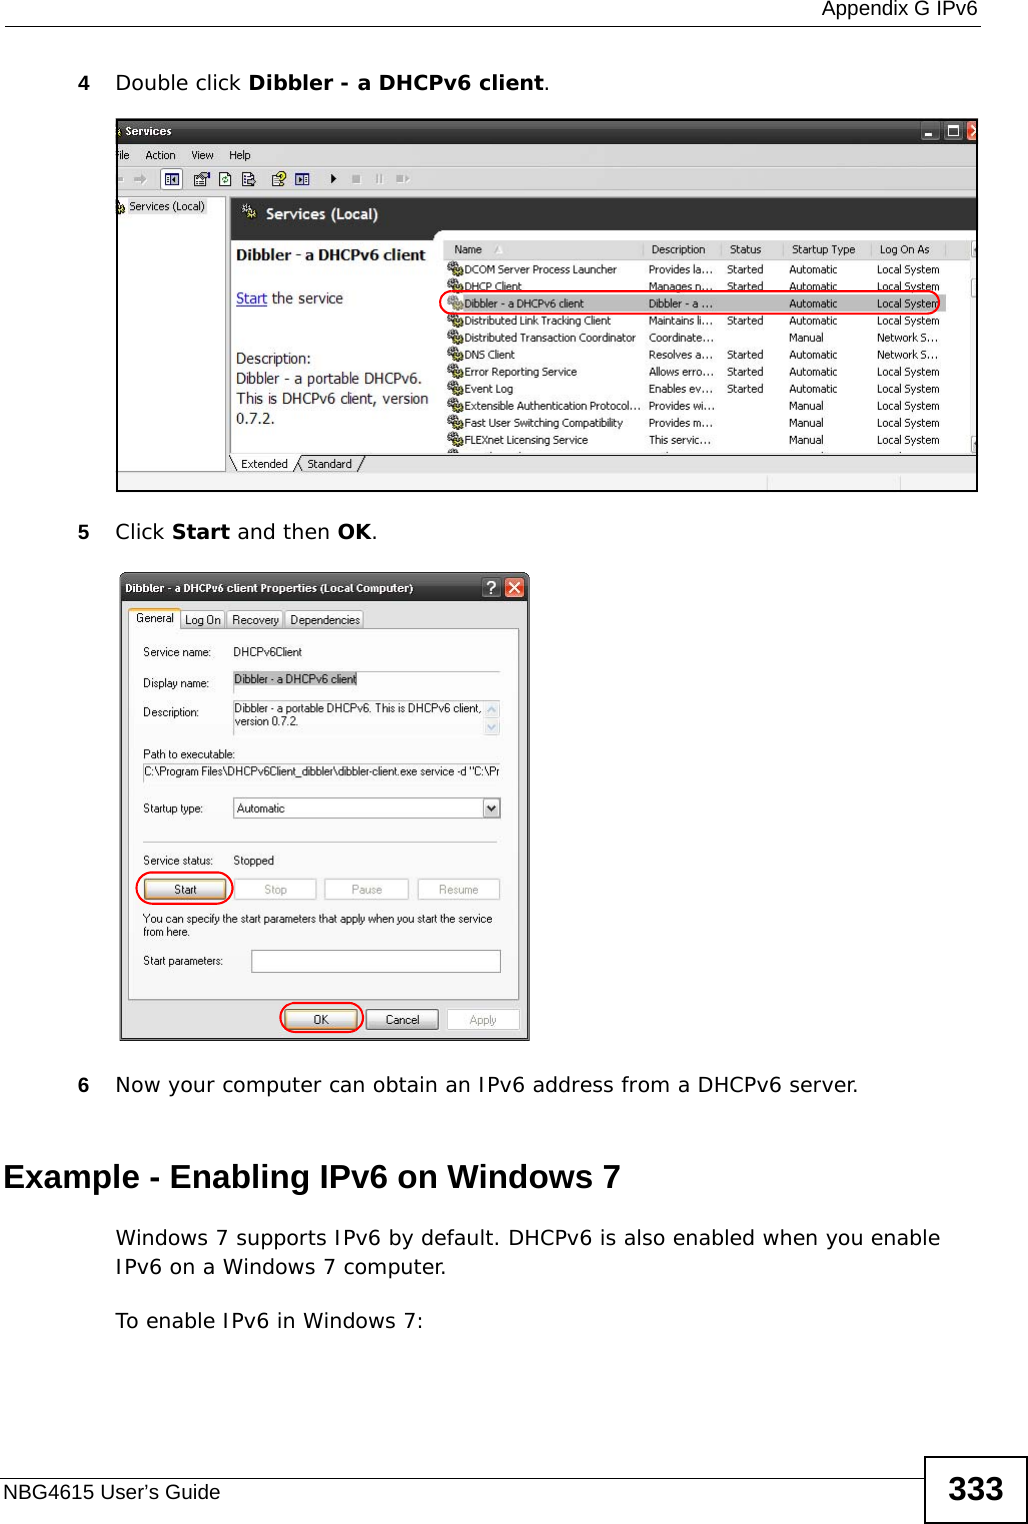  Appendix G IPv6NBG4615 User’s Guide 3334Double click Dibbler - a DHCPv6 client.5Click Start and then OK.6Now your computer can obtain an IPv6 address from a DHCPv6 server.Example - Enabling IPv6 on Windows 7Windows 7 supports IPv6 by default. DHCPv6 is also enabled when you enable IPv6 on a Windows 7 computer.To enable IPv6 in Windows 7: